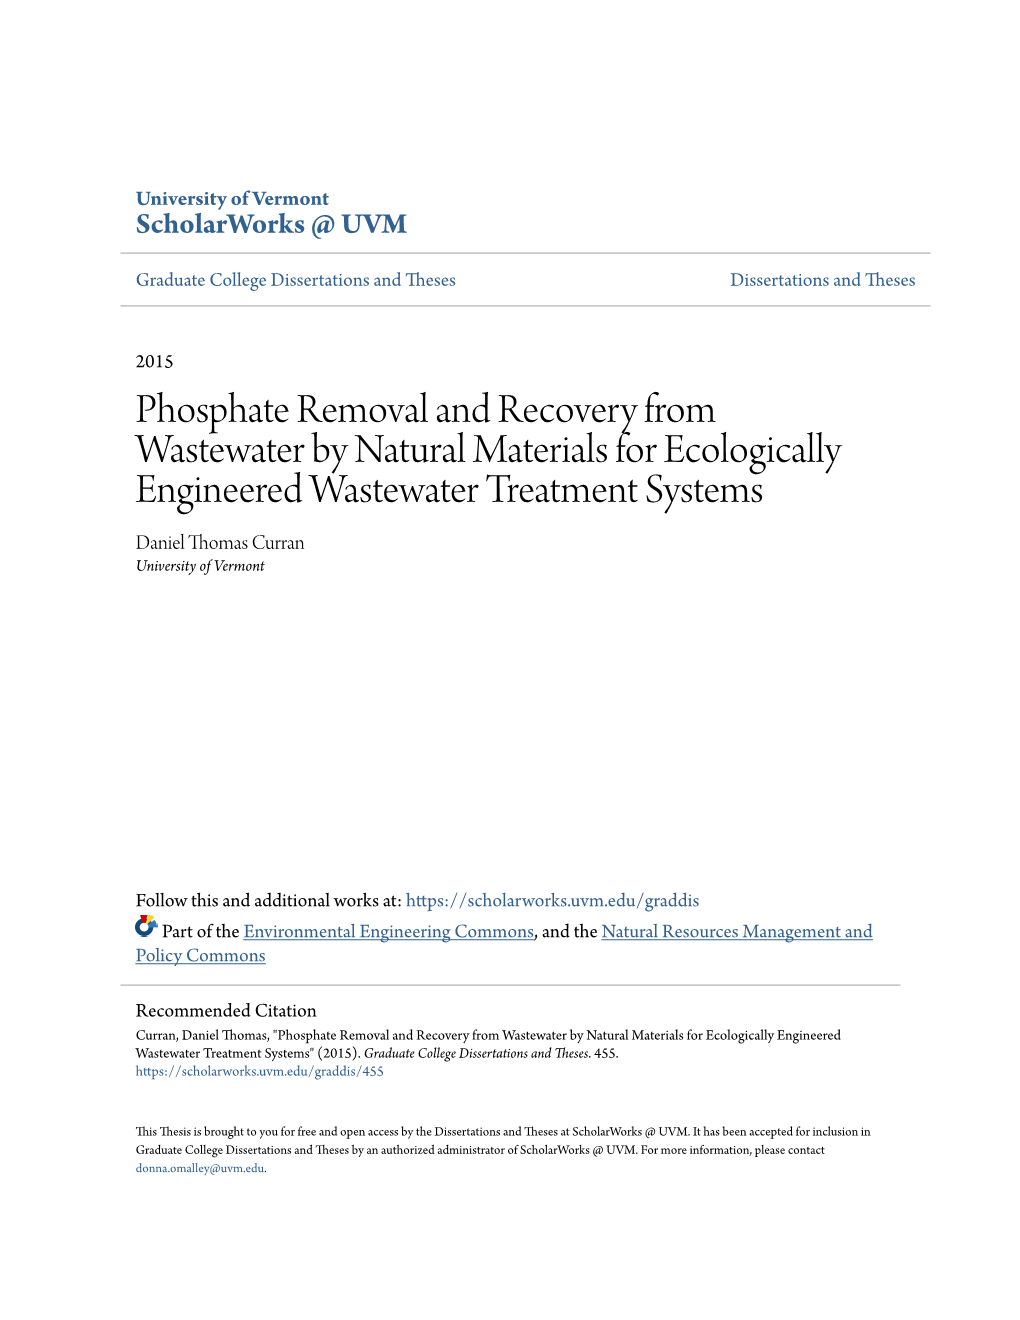 Phosphate Removal and Recovery from Wastewater by Natural